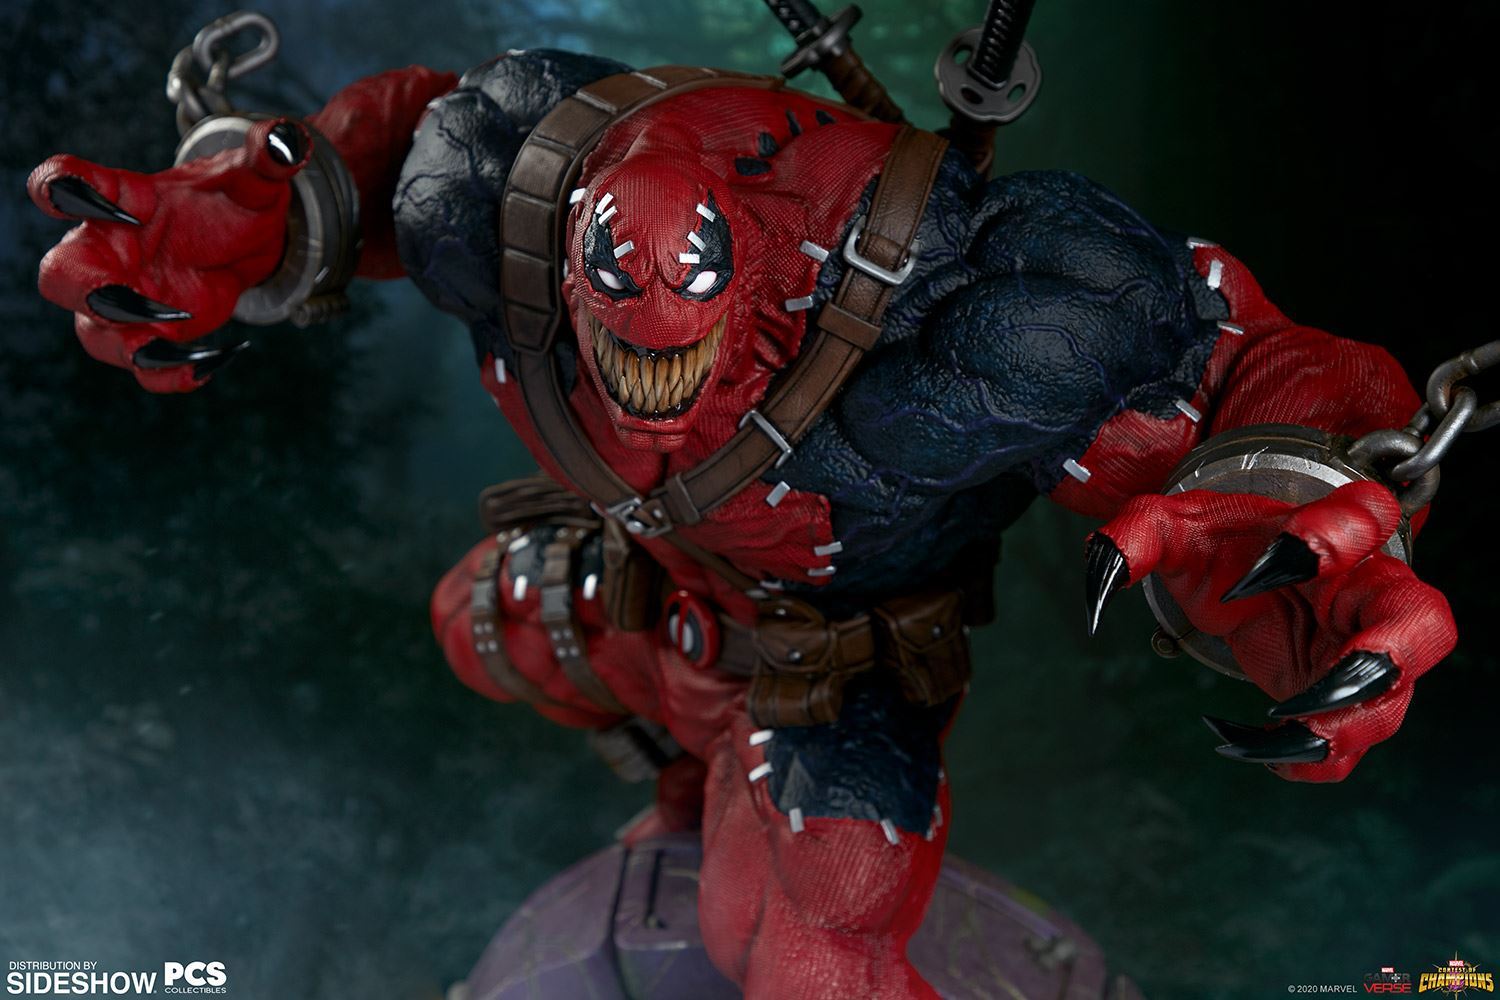 Hot Toys Unveils A Vicious Looking 'Carnage' Red 'Venom' Figure